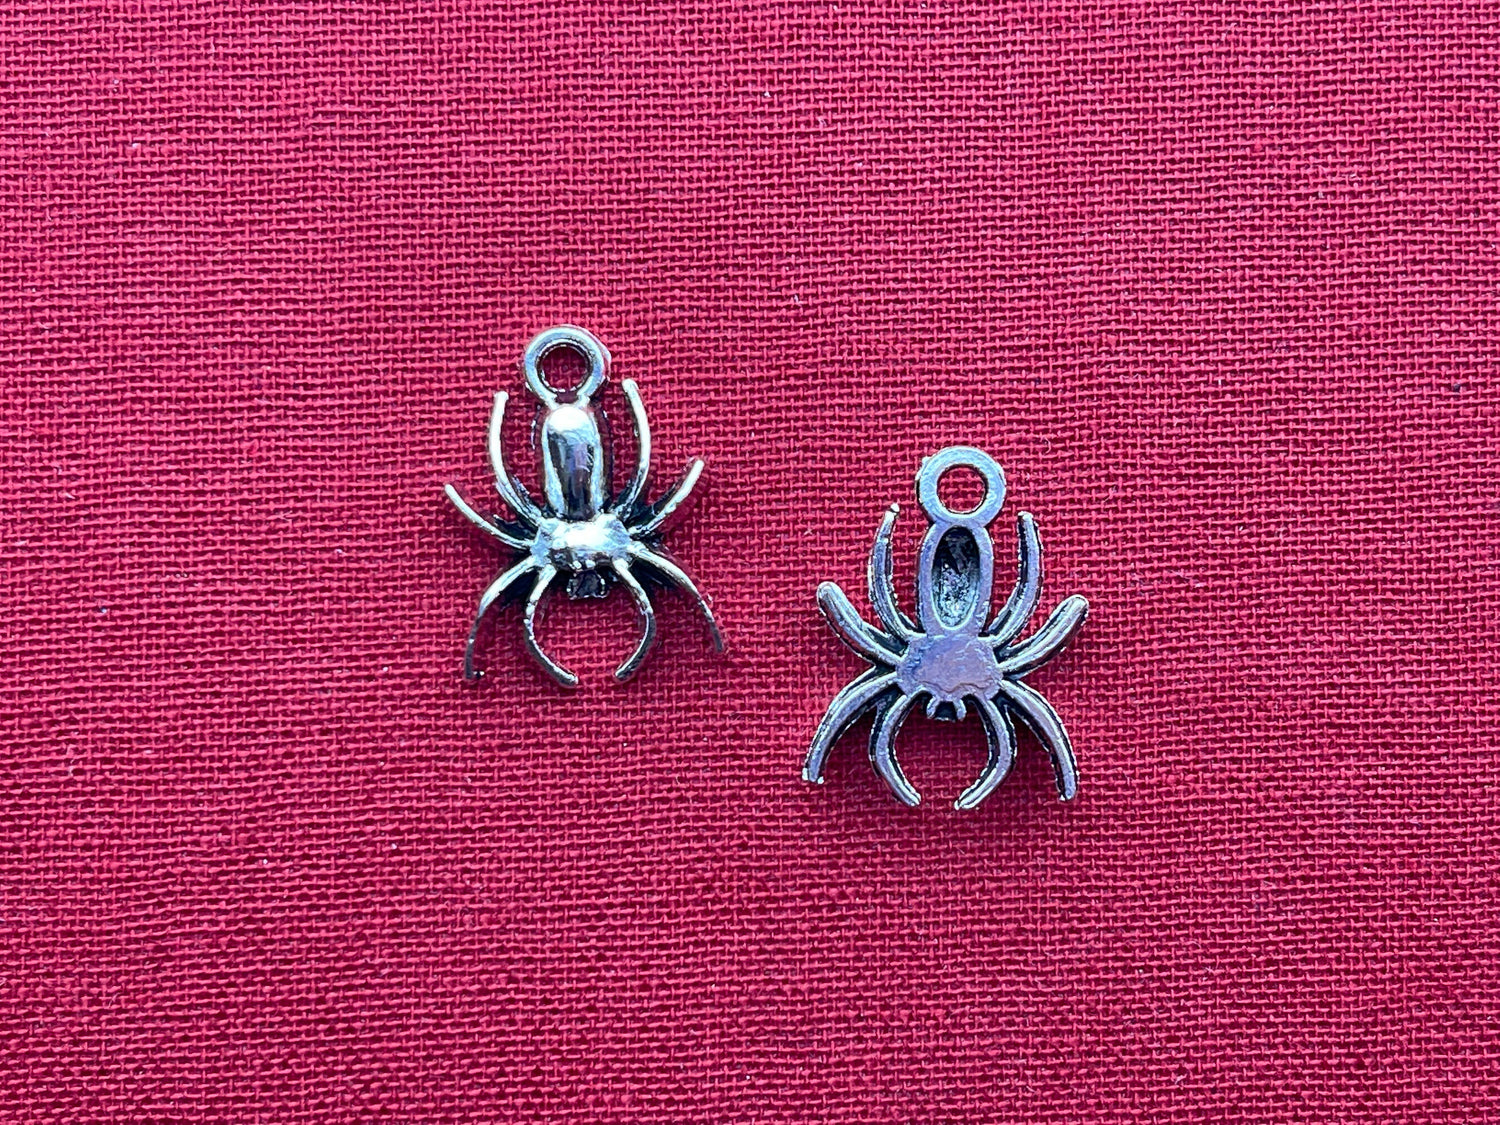 Skull & Spider Silver Charm set -Spooky Halloween charms, pendant, drop-antique silver